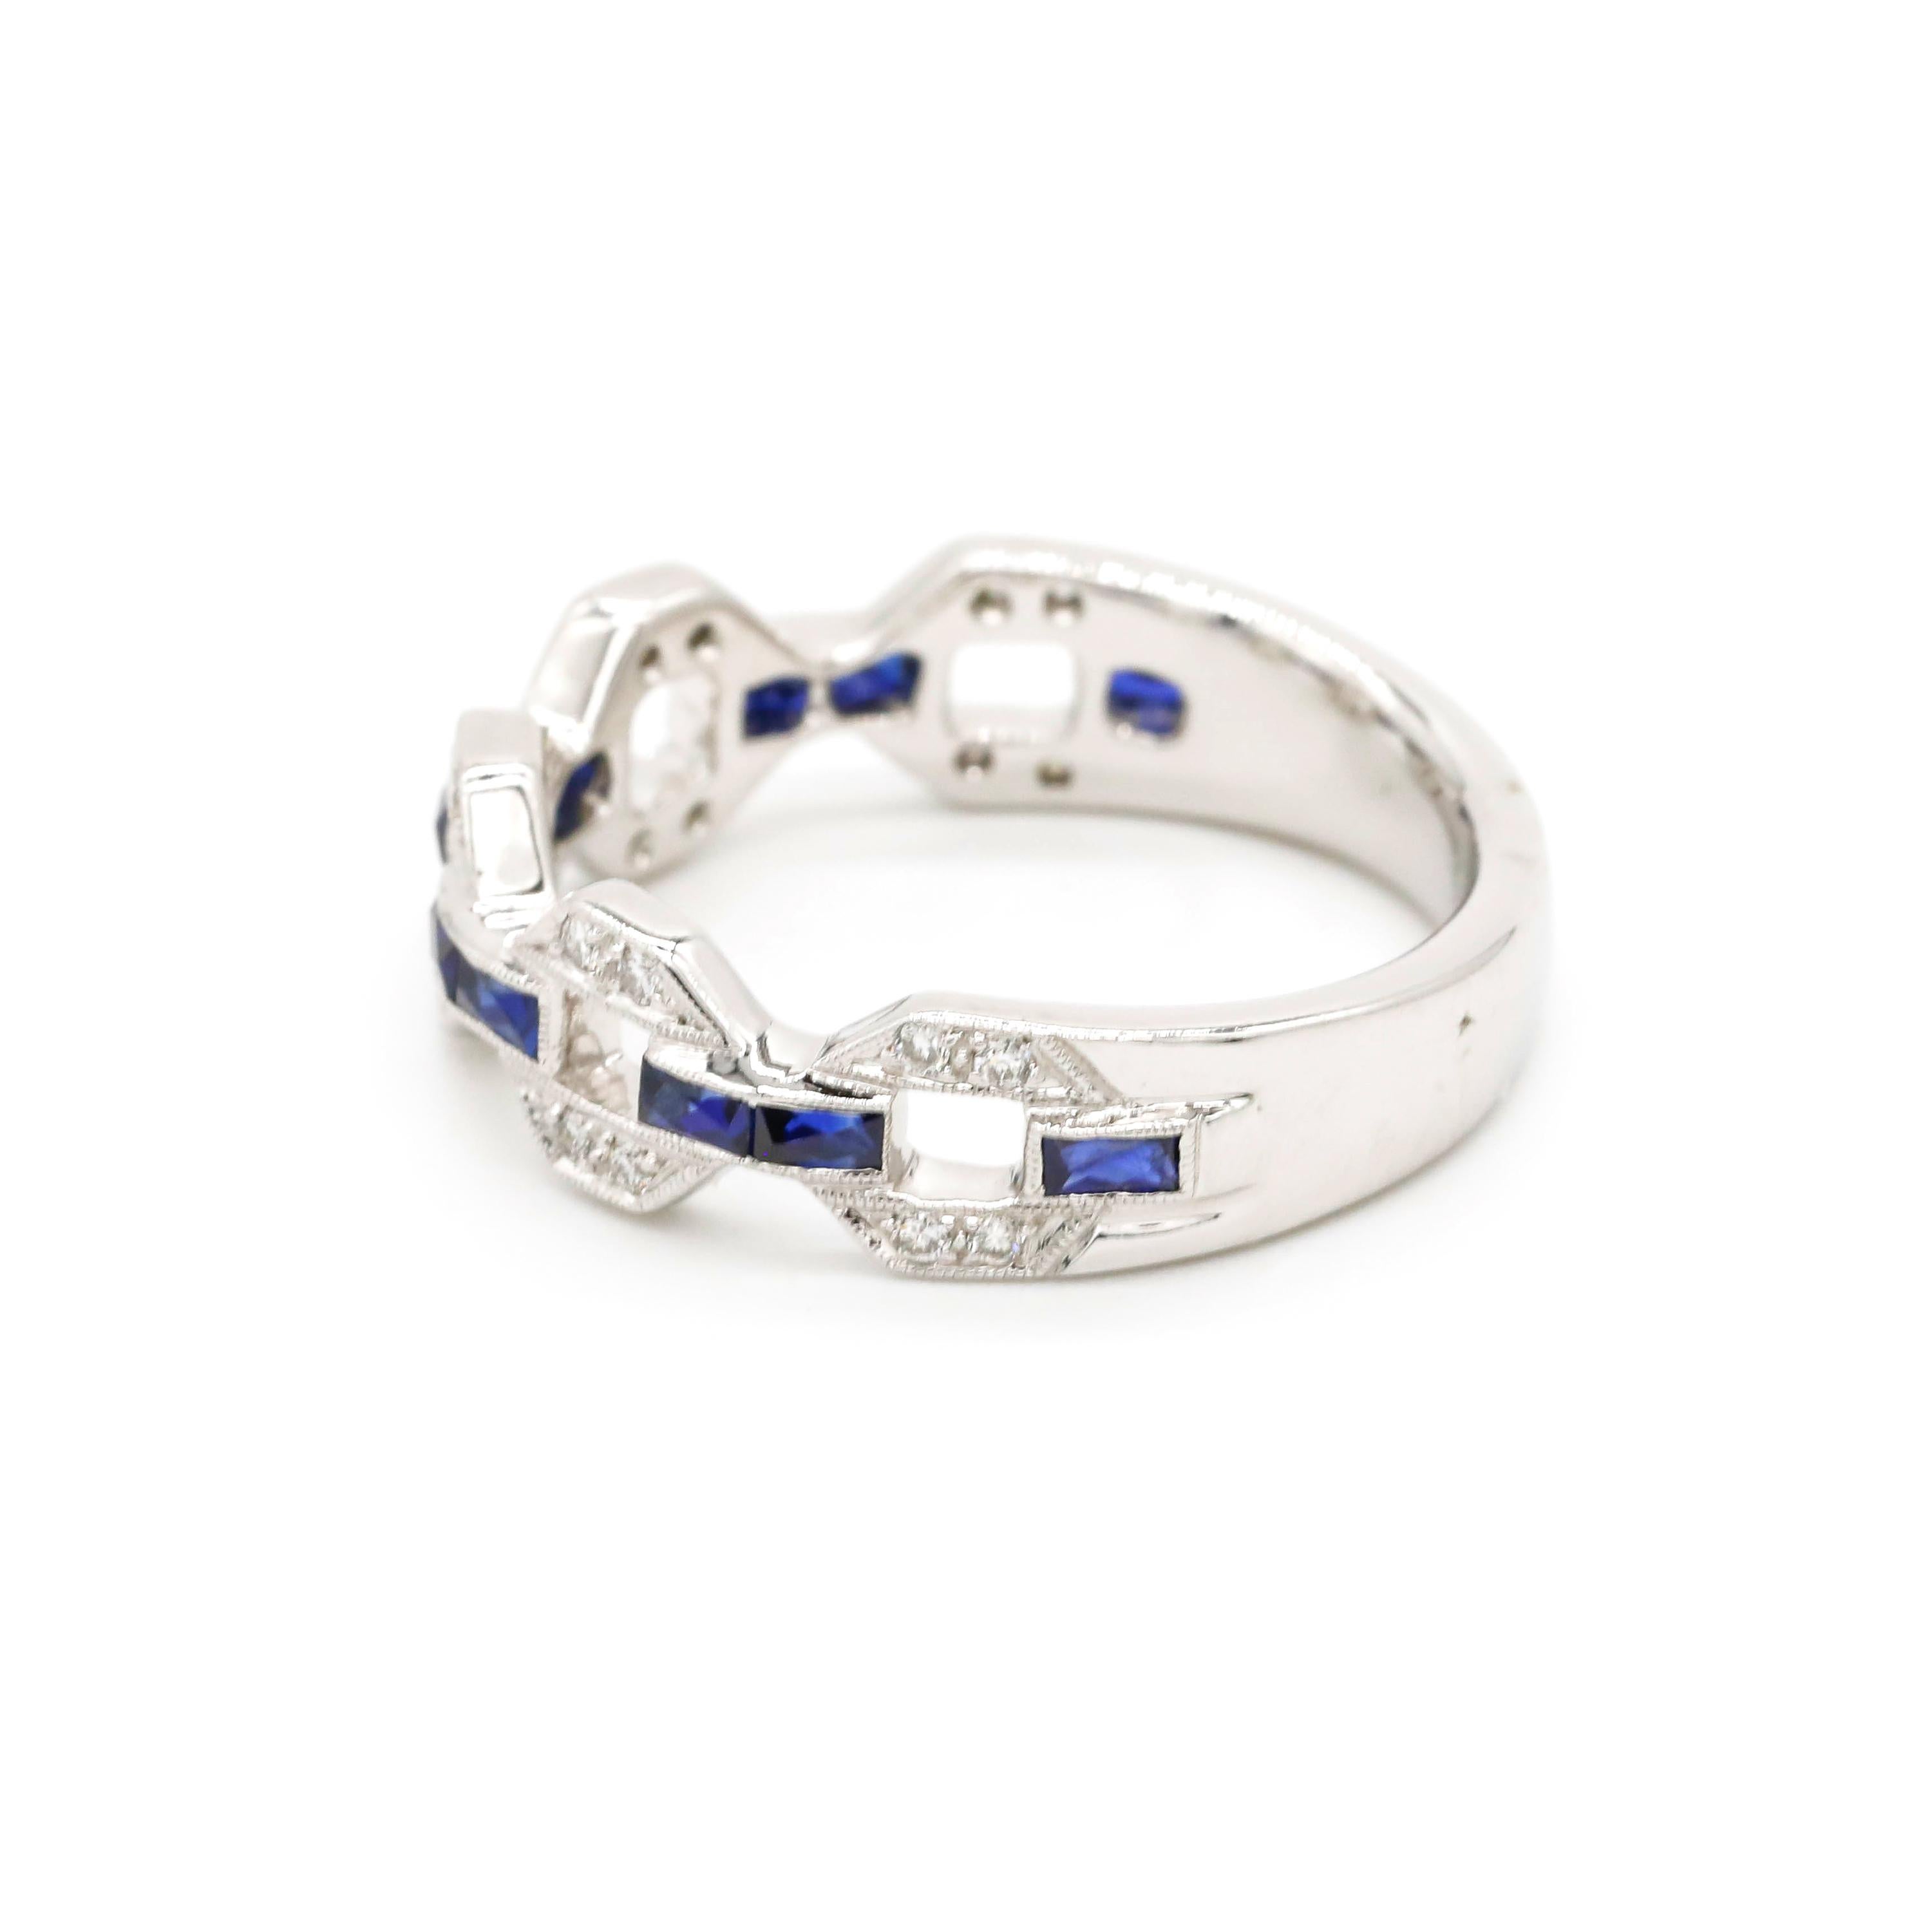 18k White Gold Link Design 0.12 CT Round Cut Diamond Pave Sapphire Band Ring

A wedding band or an Anniversary ring - this ring is just perfection. Featuring a single row of 0.52 Carat natural blue sapphire stones , set in a prong setting. Buffed to